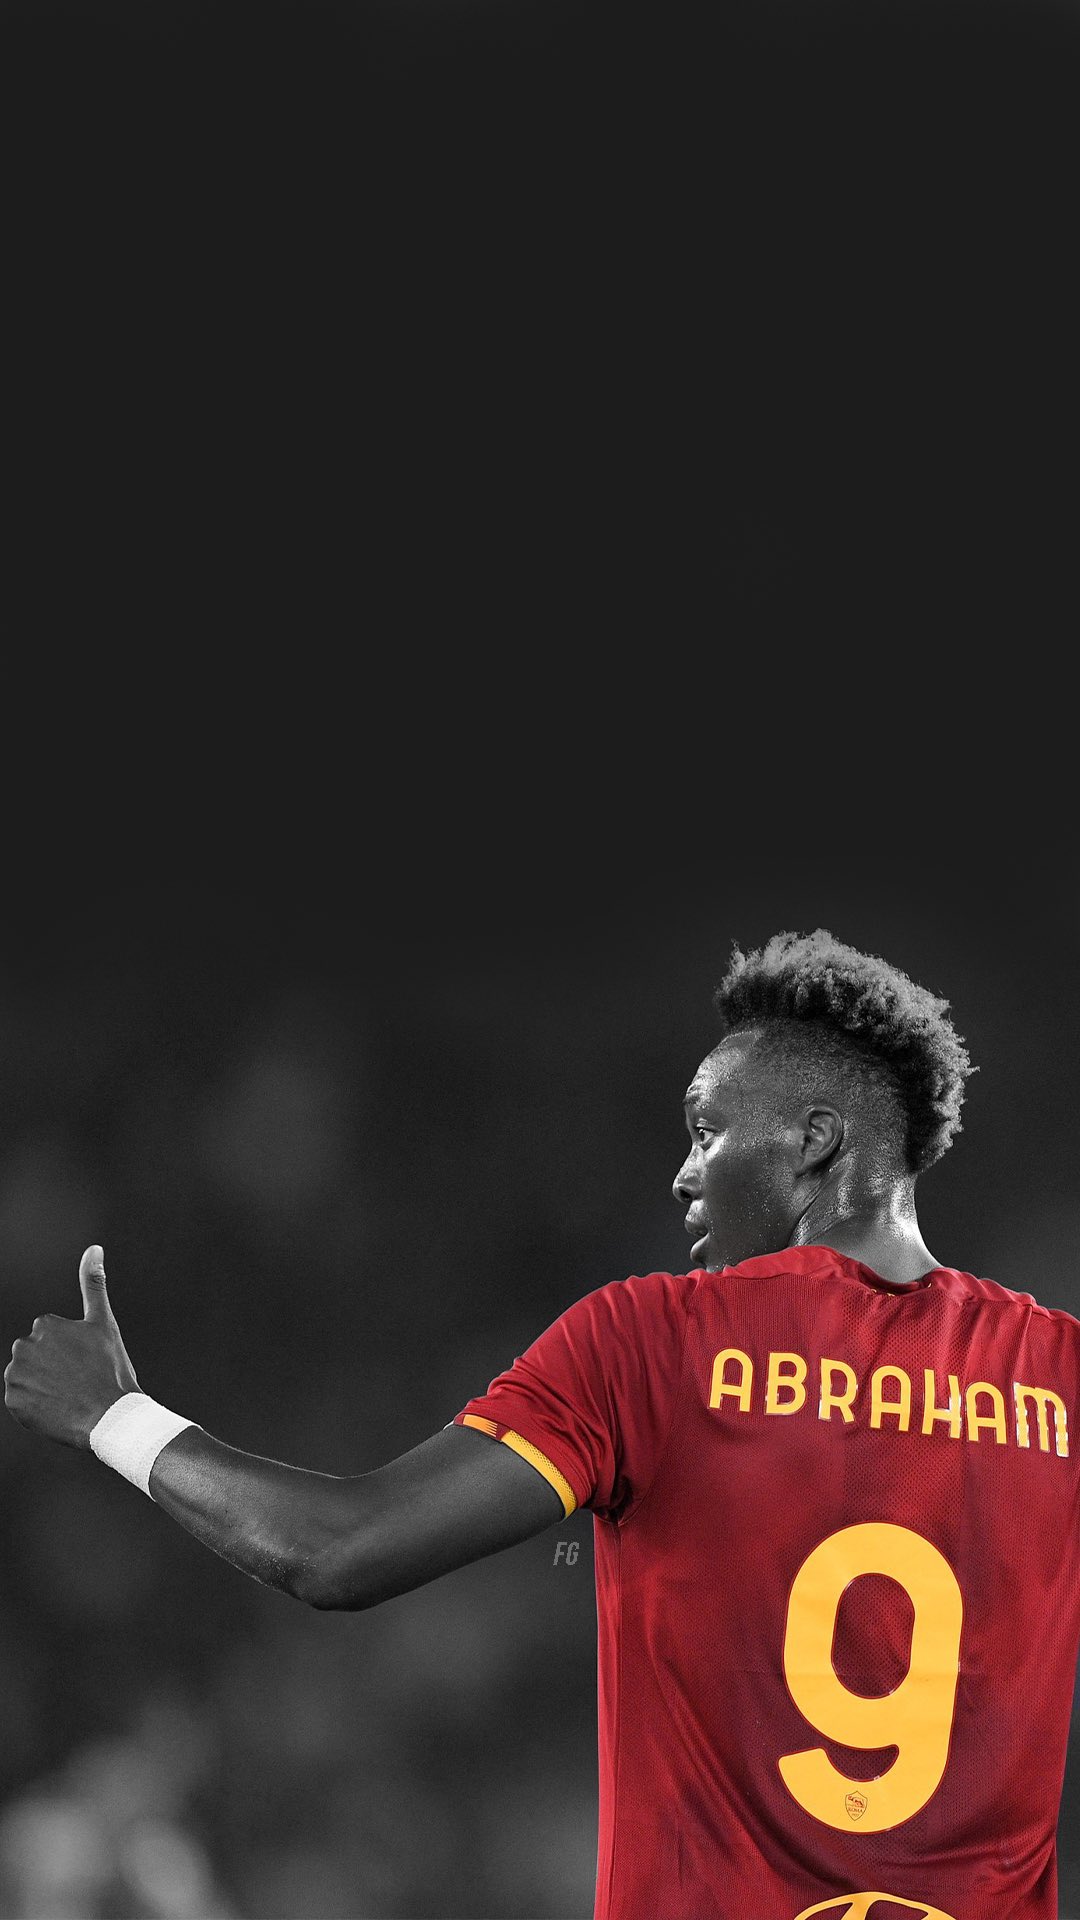 Tammy abraham as roma background images and wallpapers â yl computing